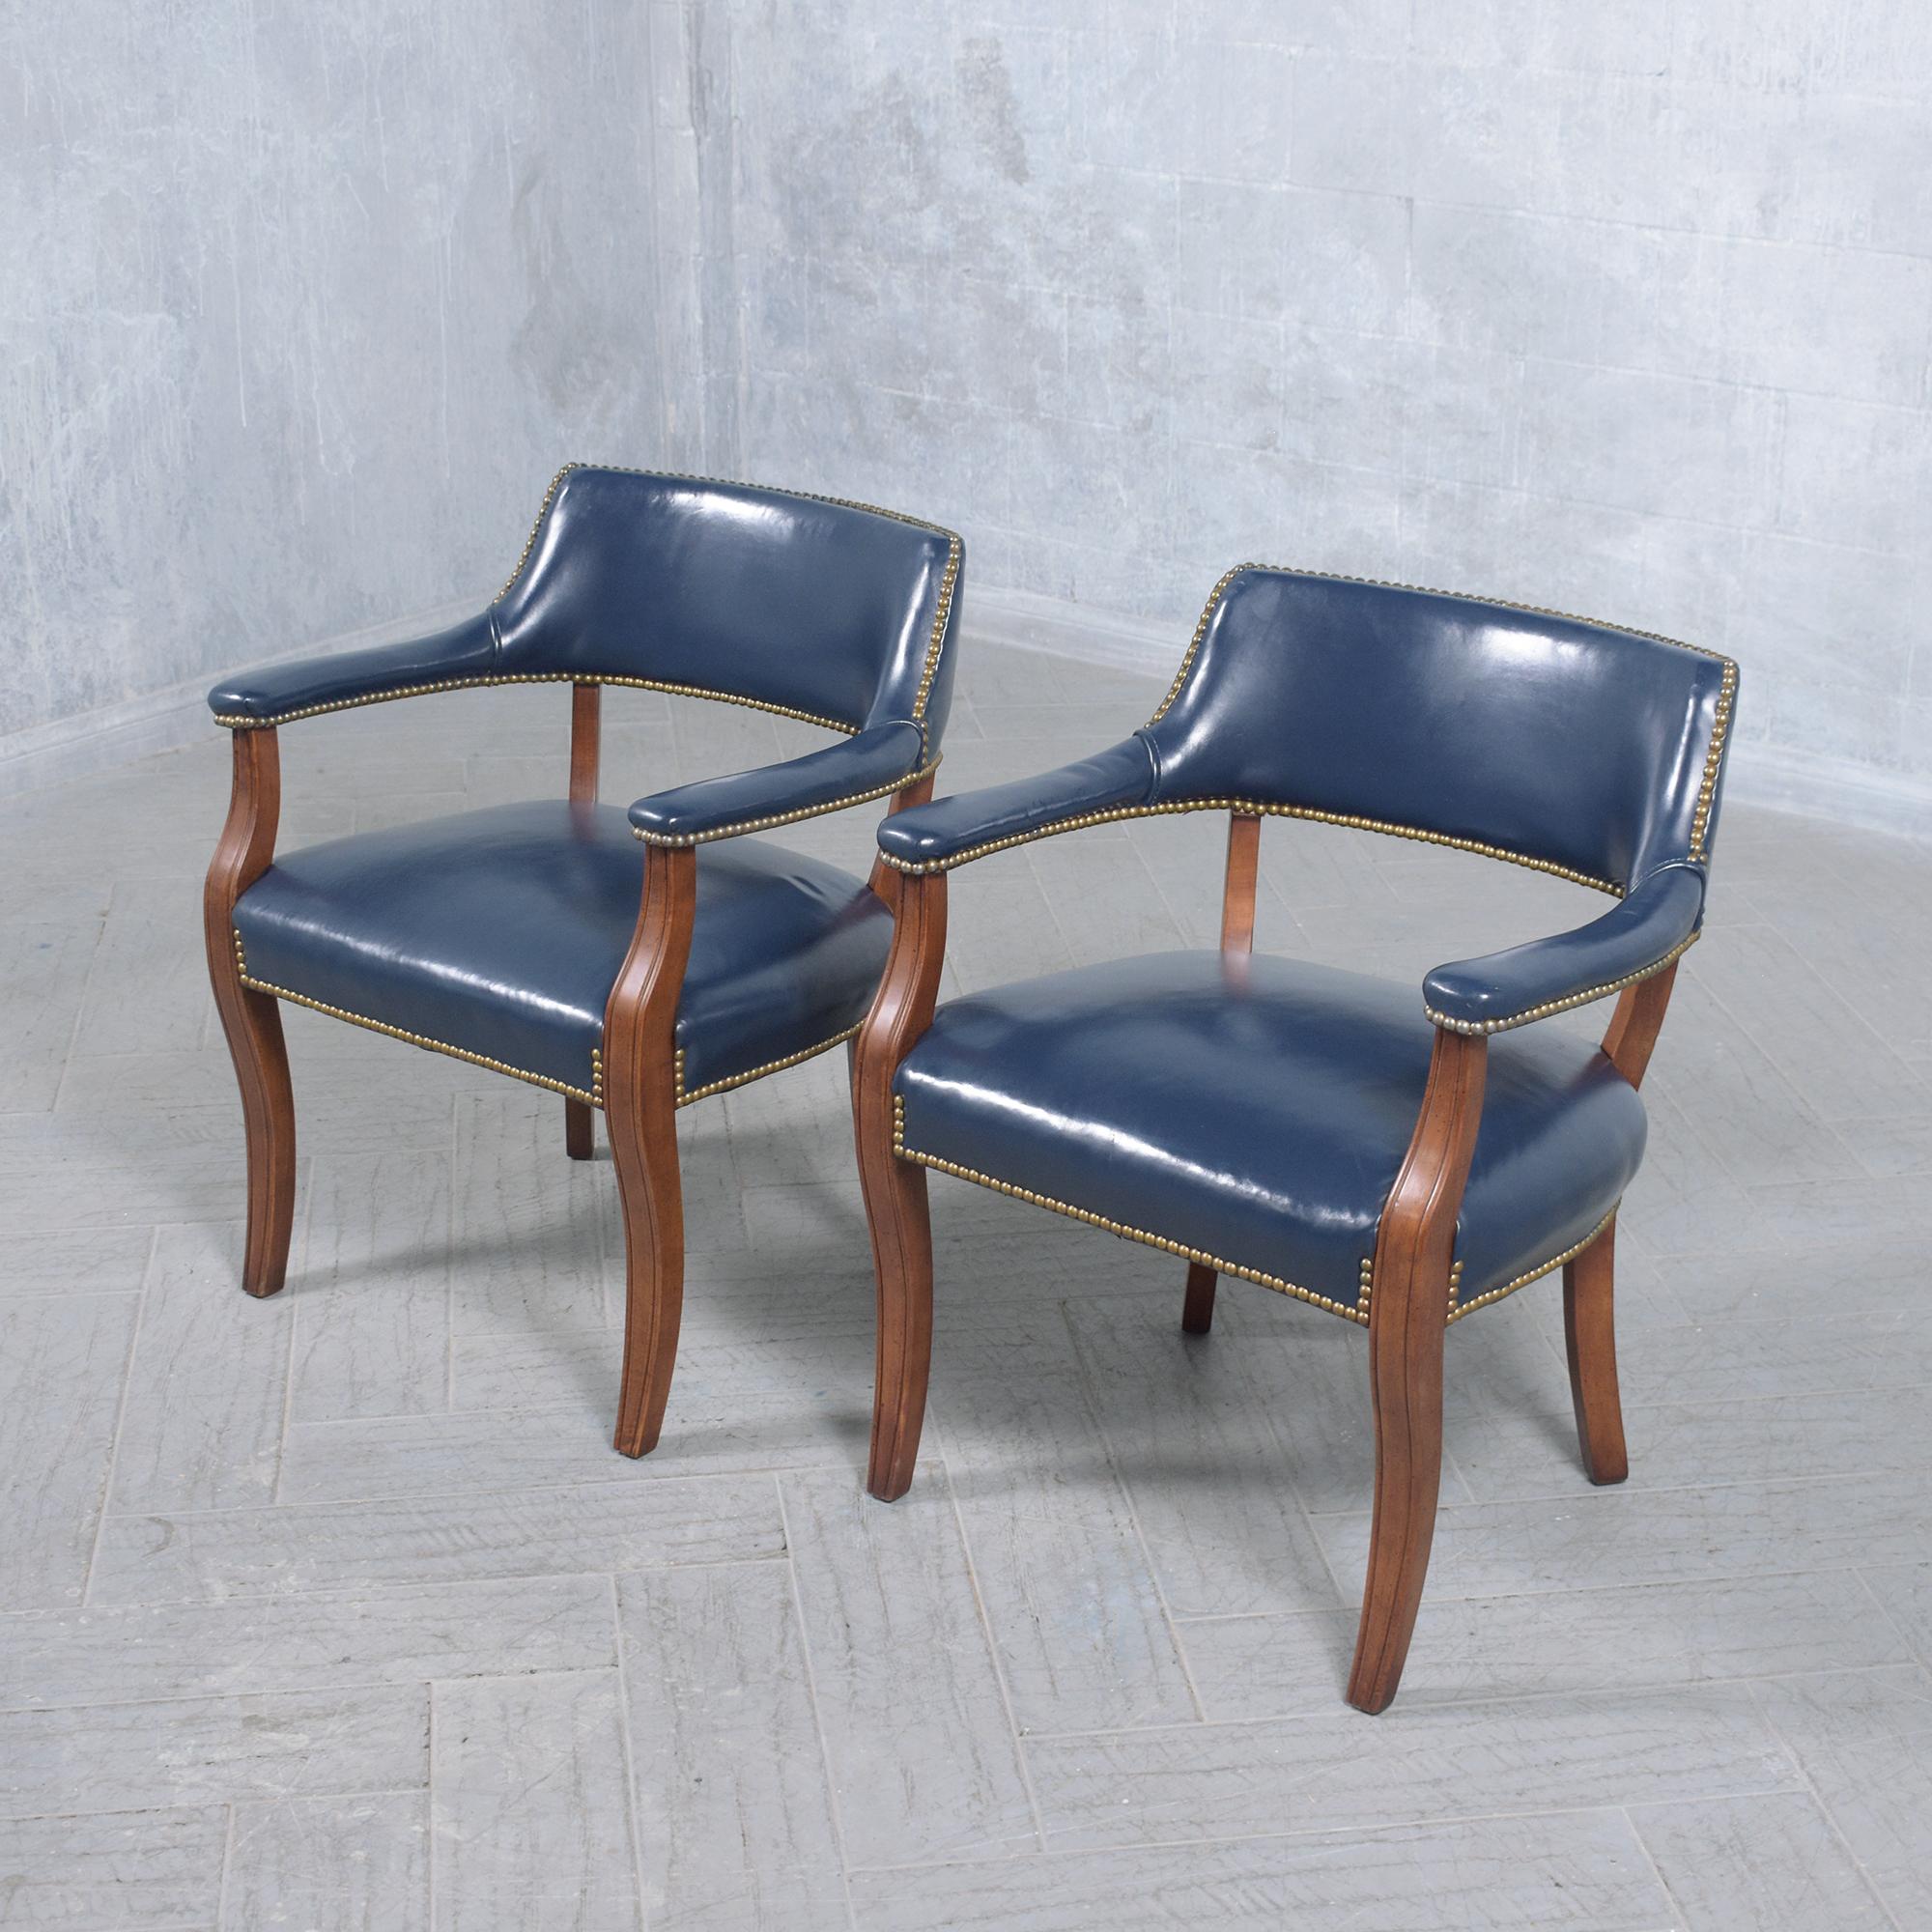 Mid-20th Century Timeless Mahogany Barrel Armchairs with Navy Leather Upholstery For Sale